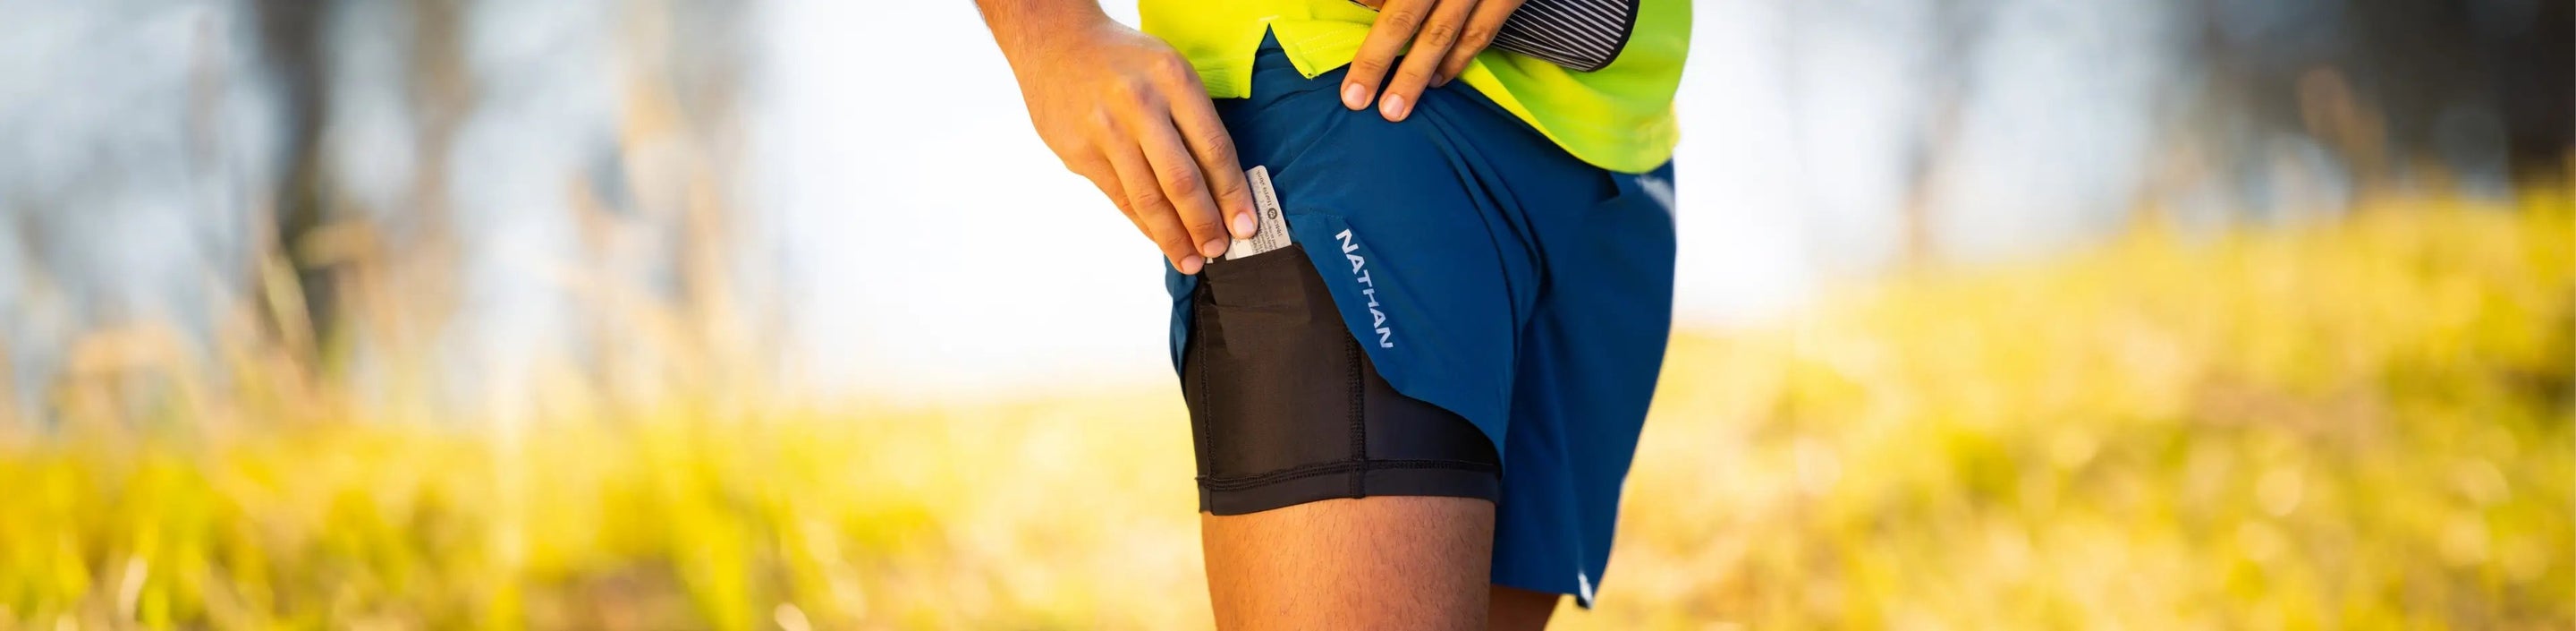 man wearing Nathan Shorts running shorts putting a cell phone in the liner pocket